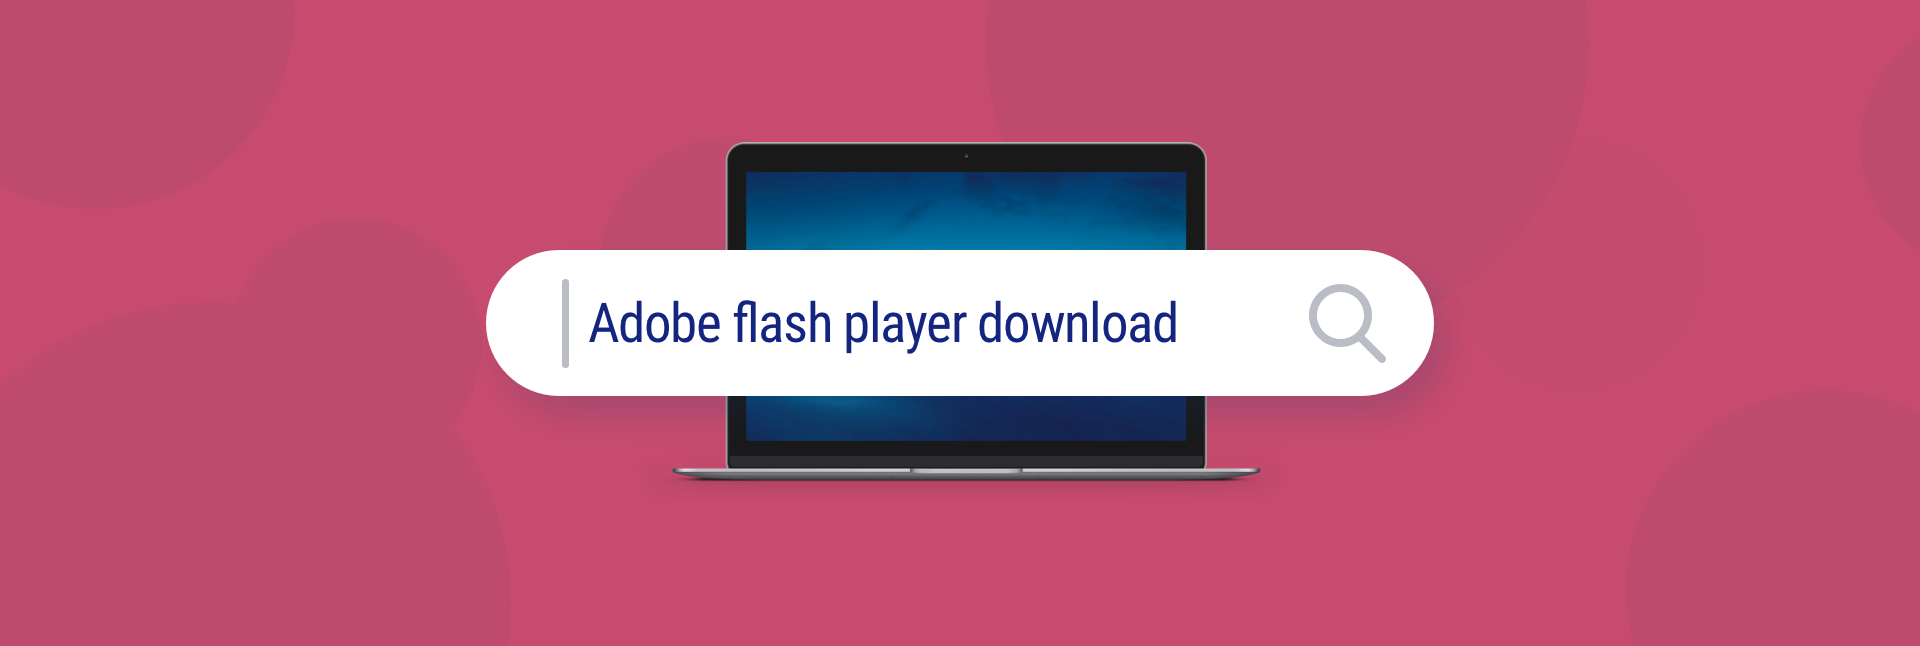 adobe flash player free download for windows 10 chrome